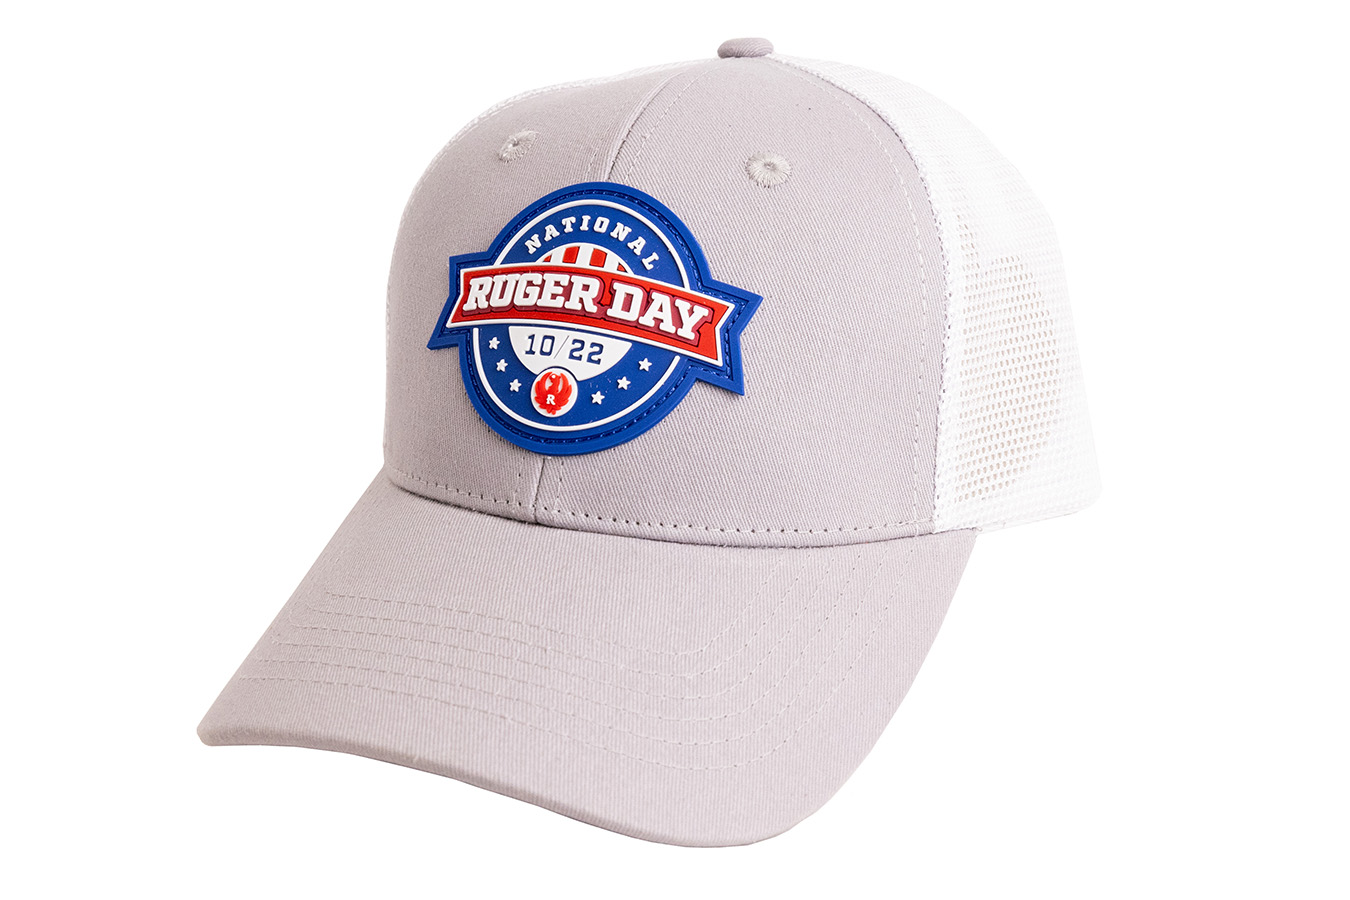 Ruger 10/22 Day Hat, Sticker and Challenge Coin Package | Sportsman's ...